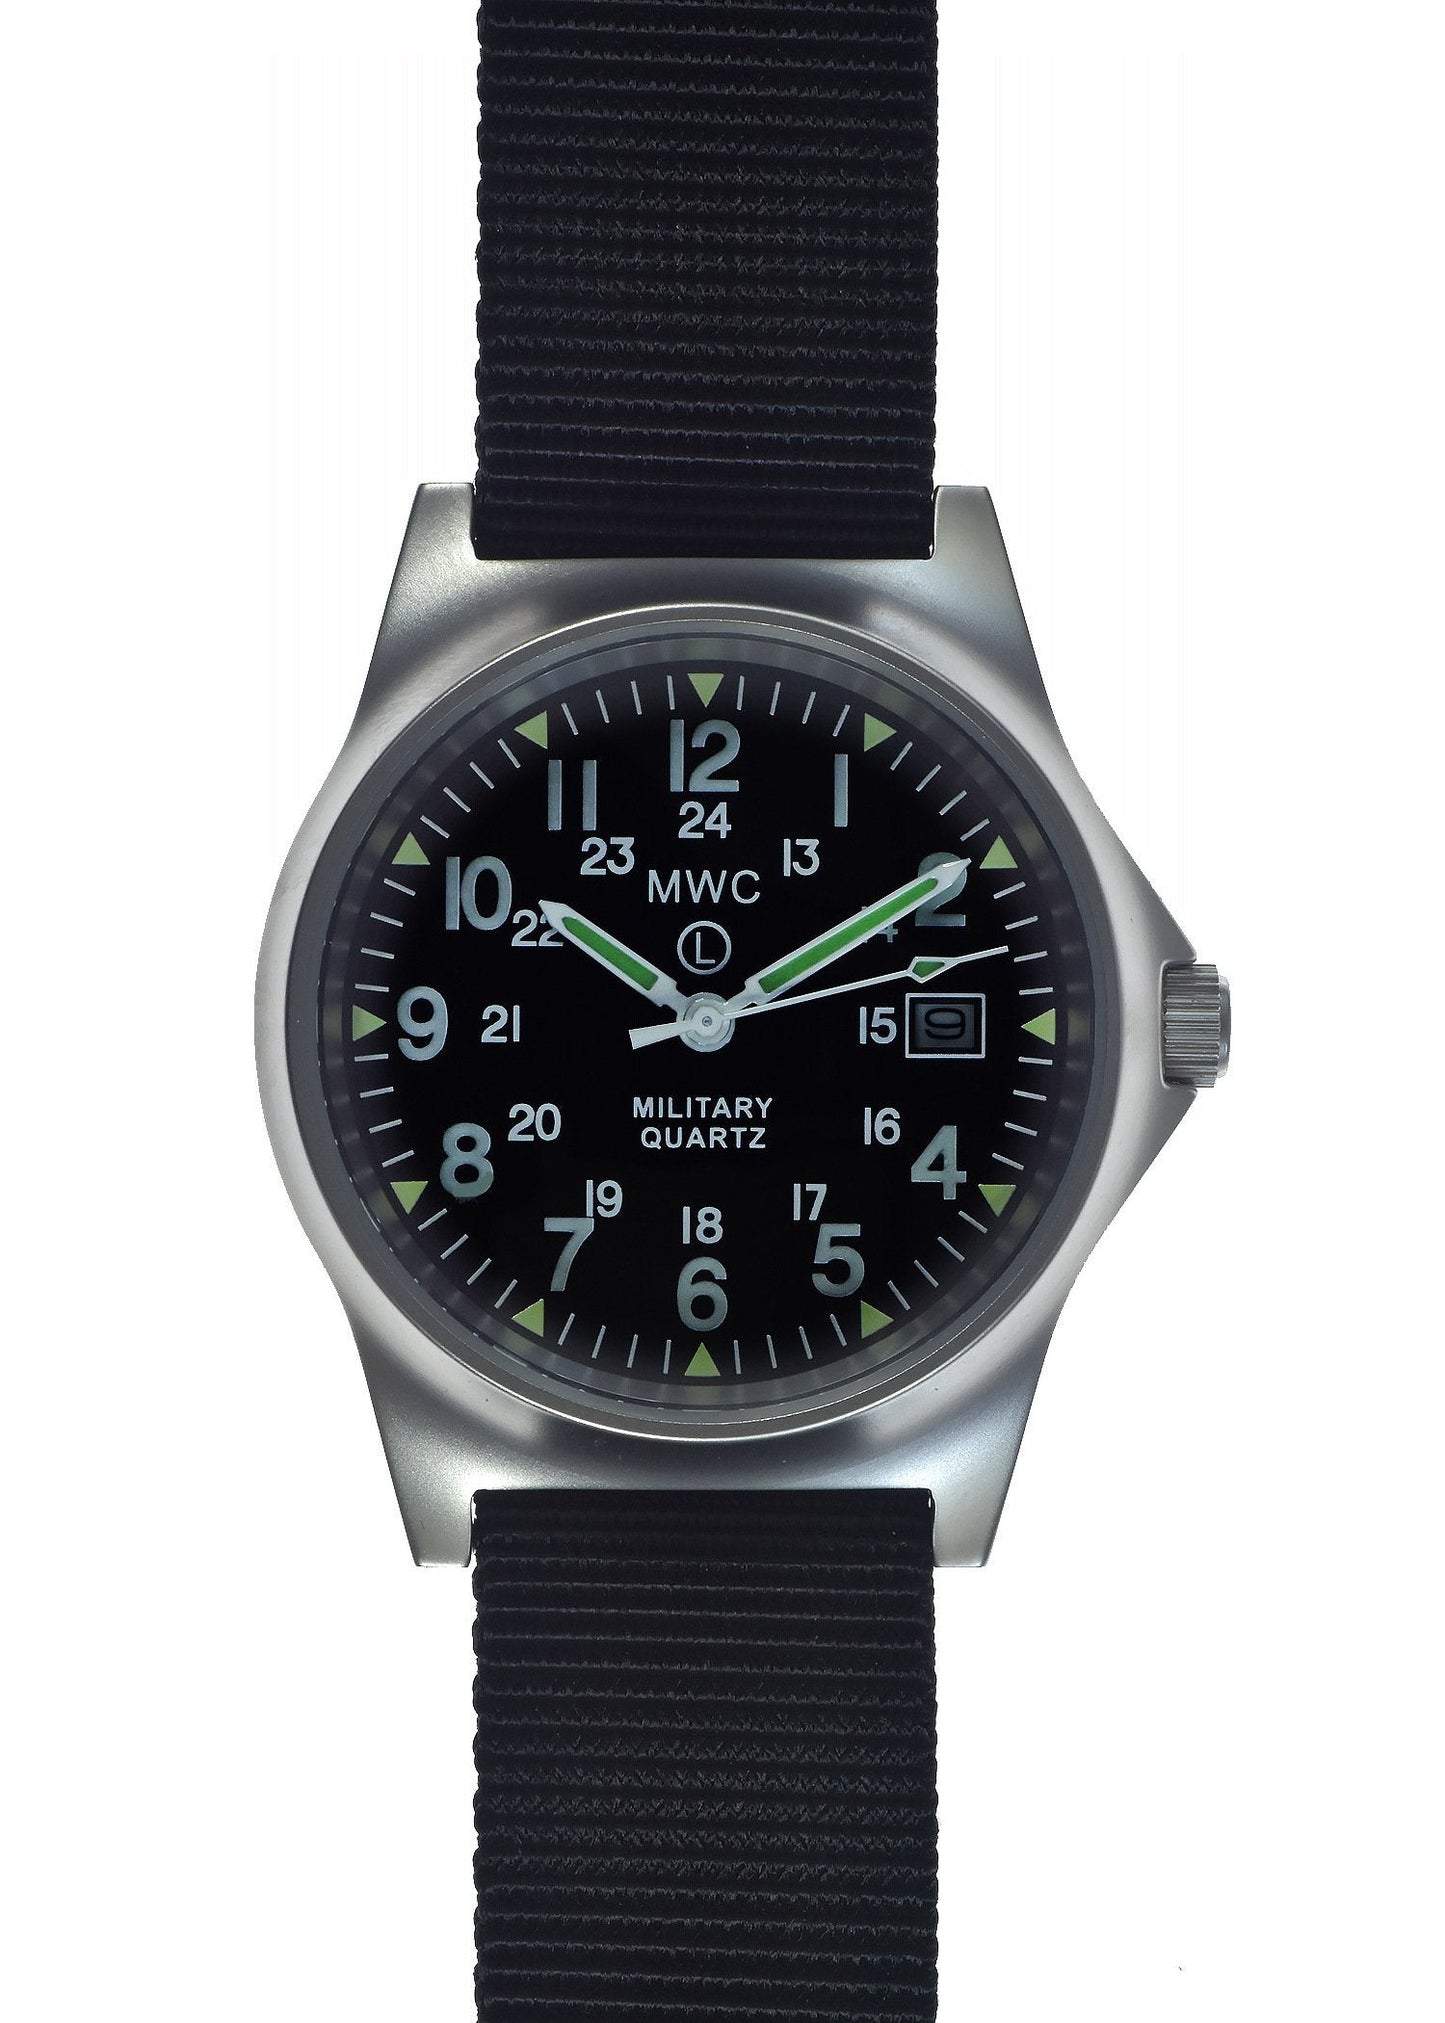 MWC G10 LM Stainless Steel Military Watch with 12/24 Hour Dial